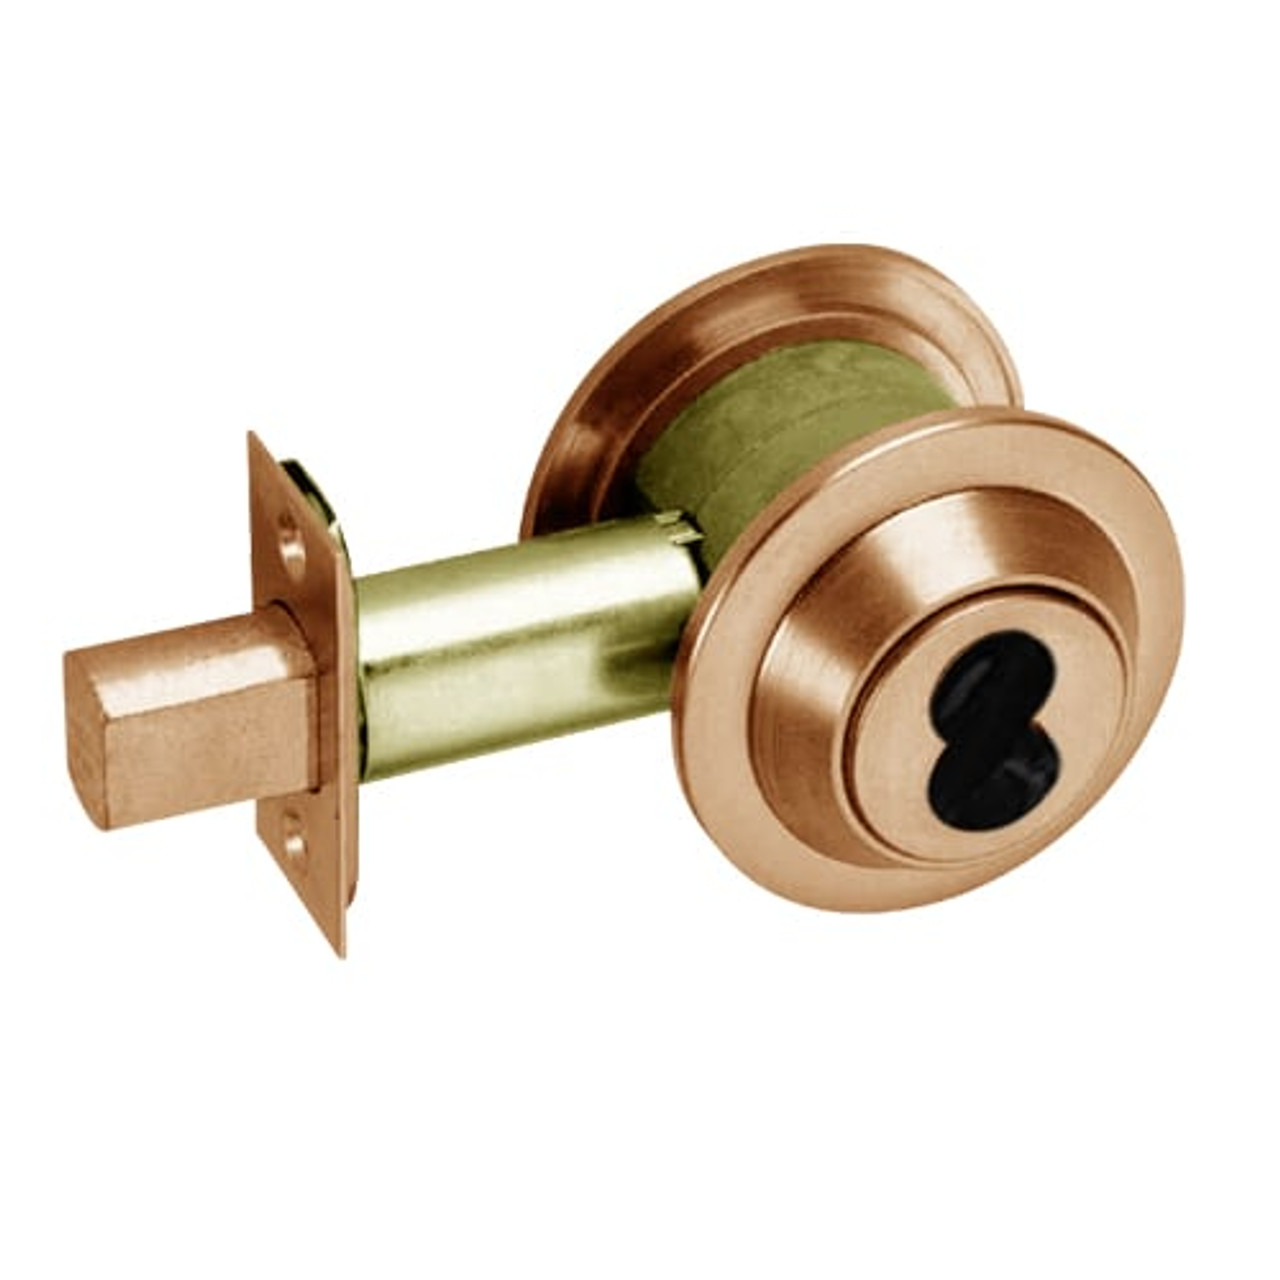 DL3013-612-CL6 Corbin DL3000 Series IC 6-Pin Less Core Cylindrical Deadlocks with Single Cylinder in Satin Bronze Finish